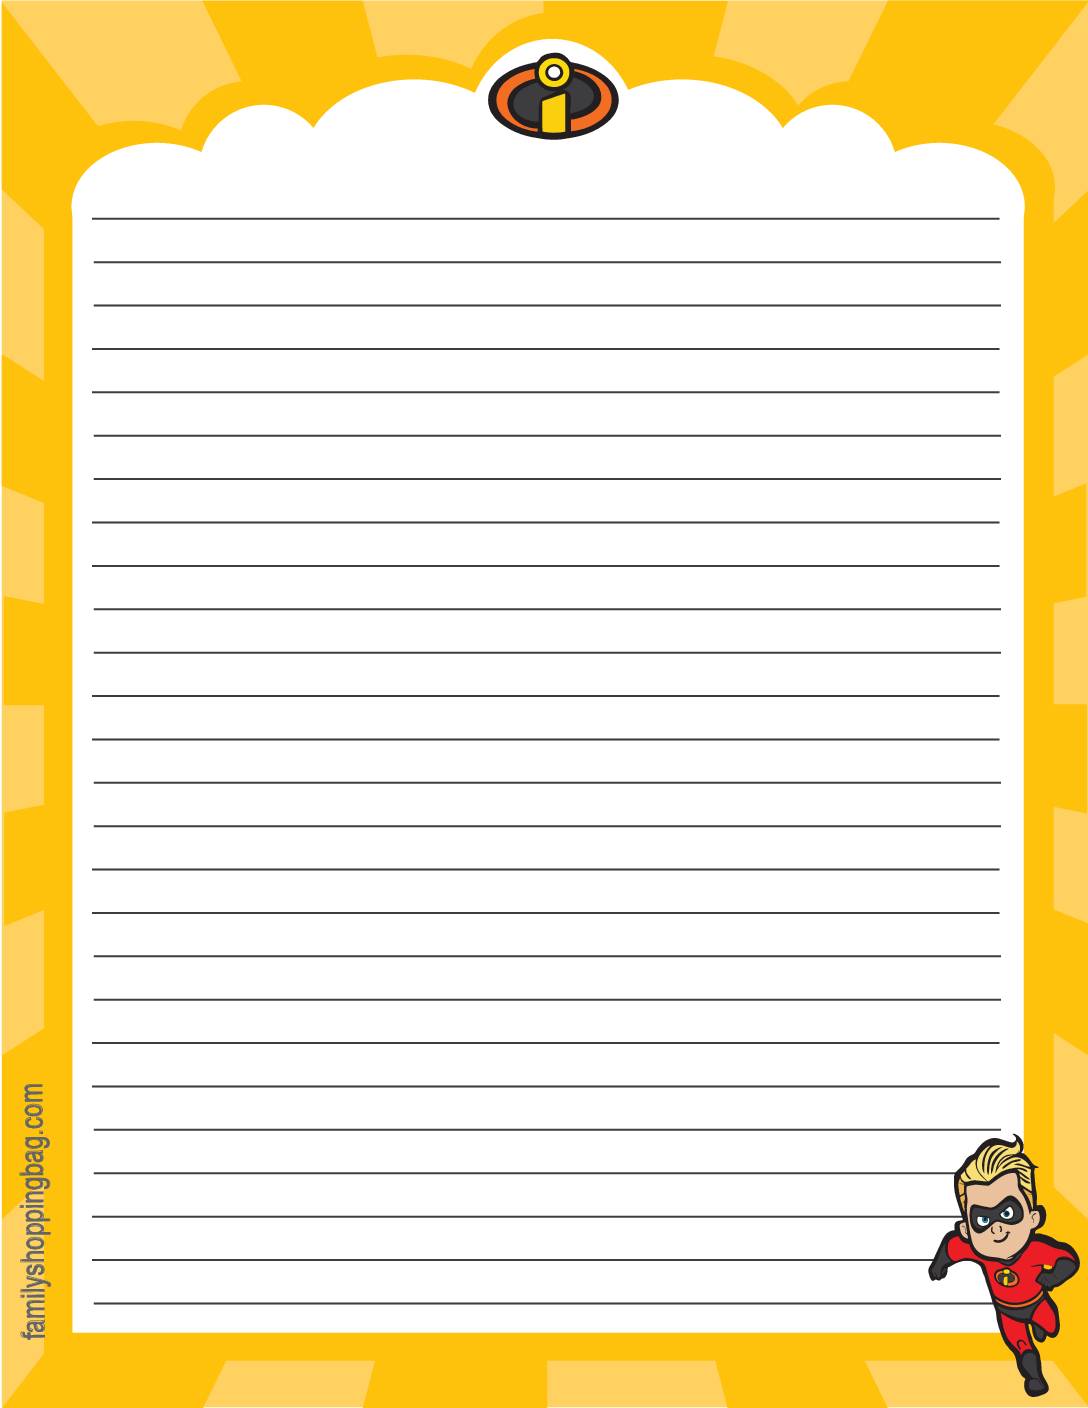 Stationery 2 Incredibles Stationery